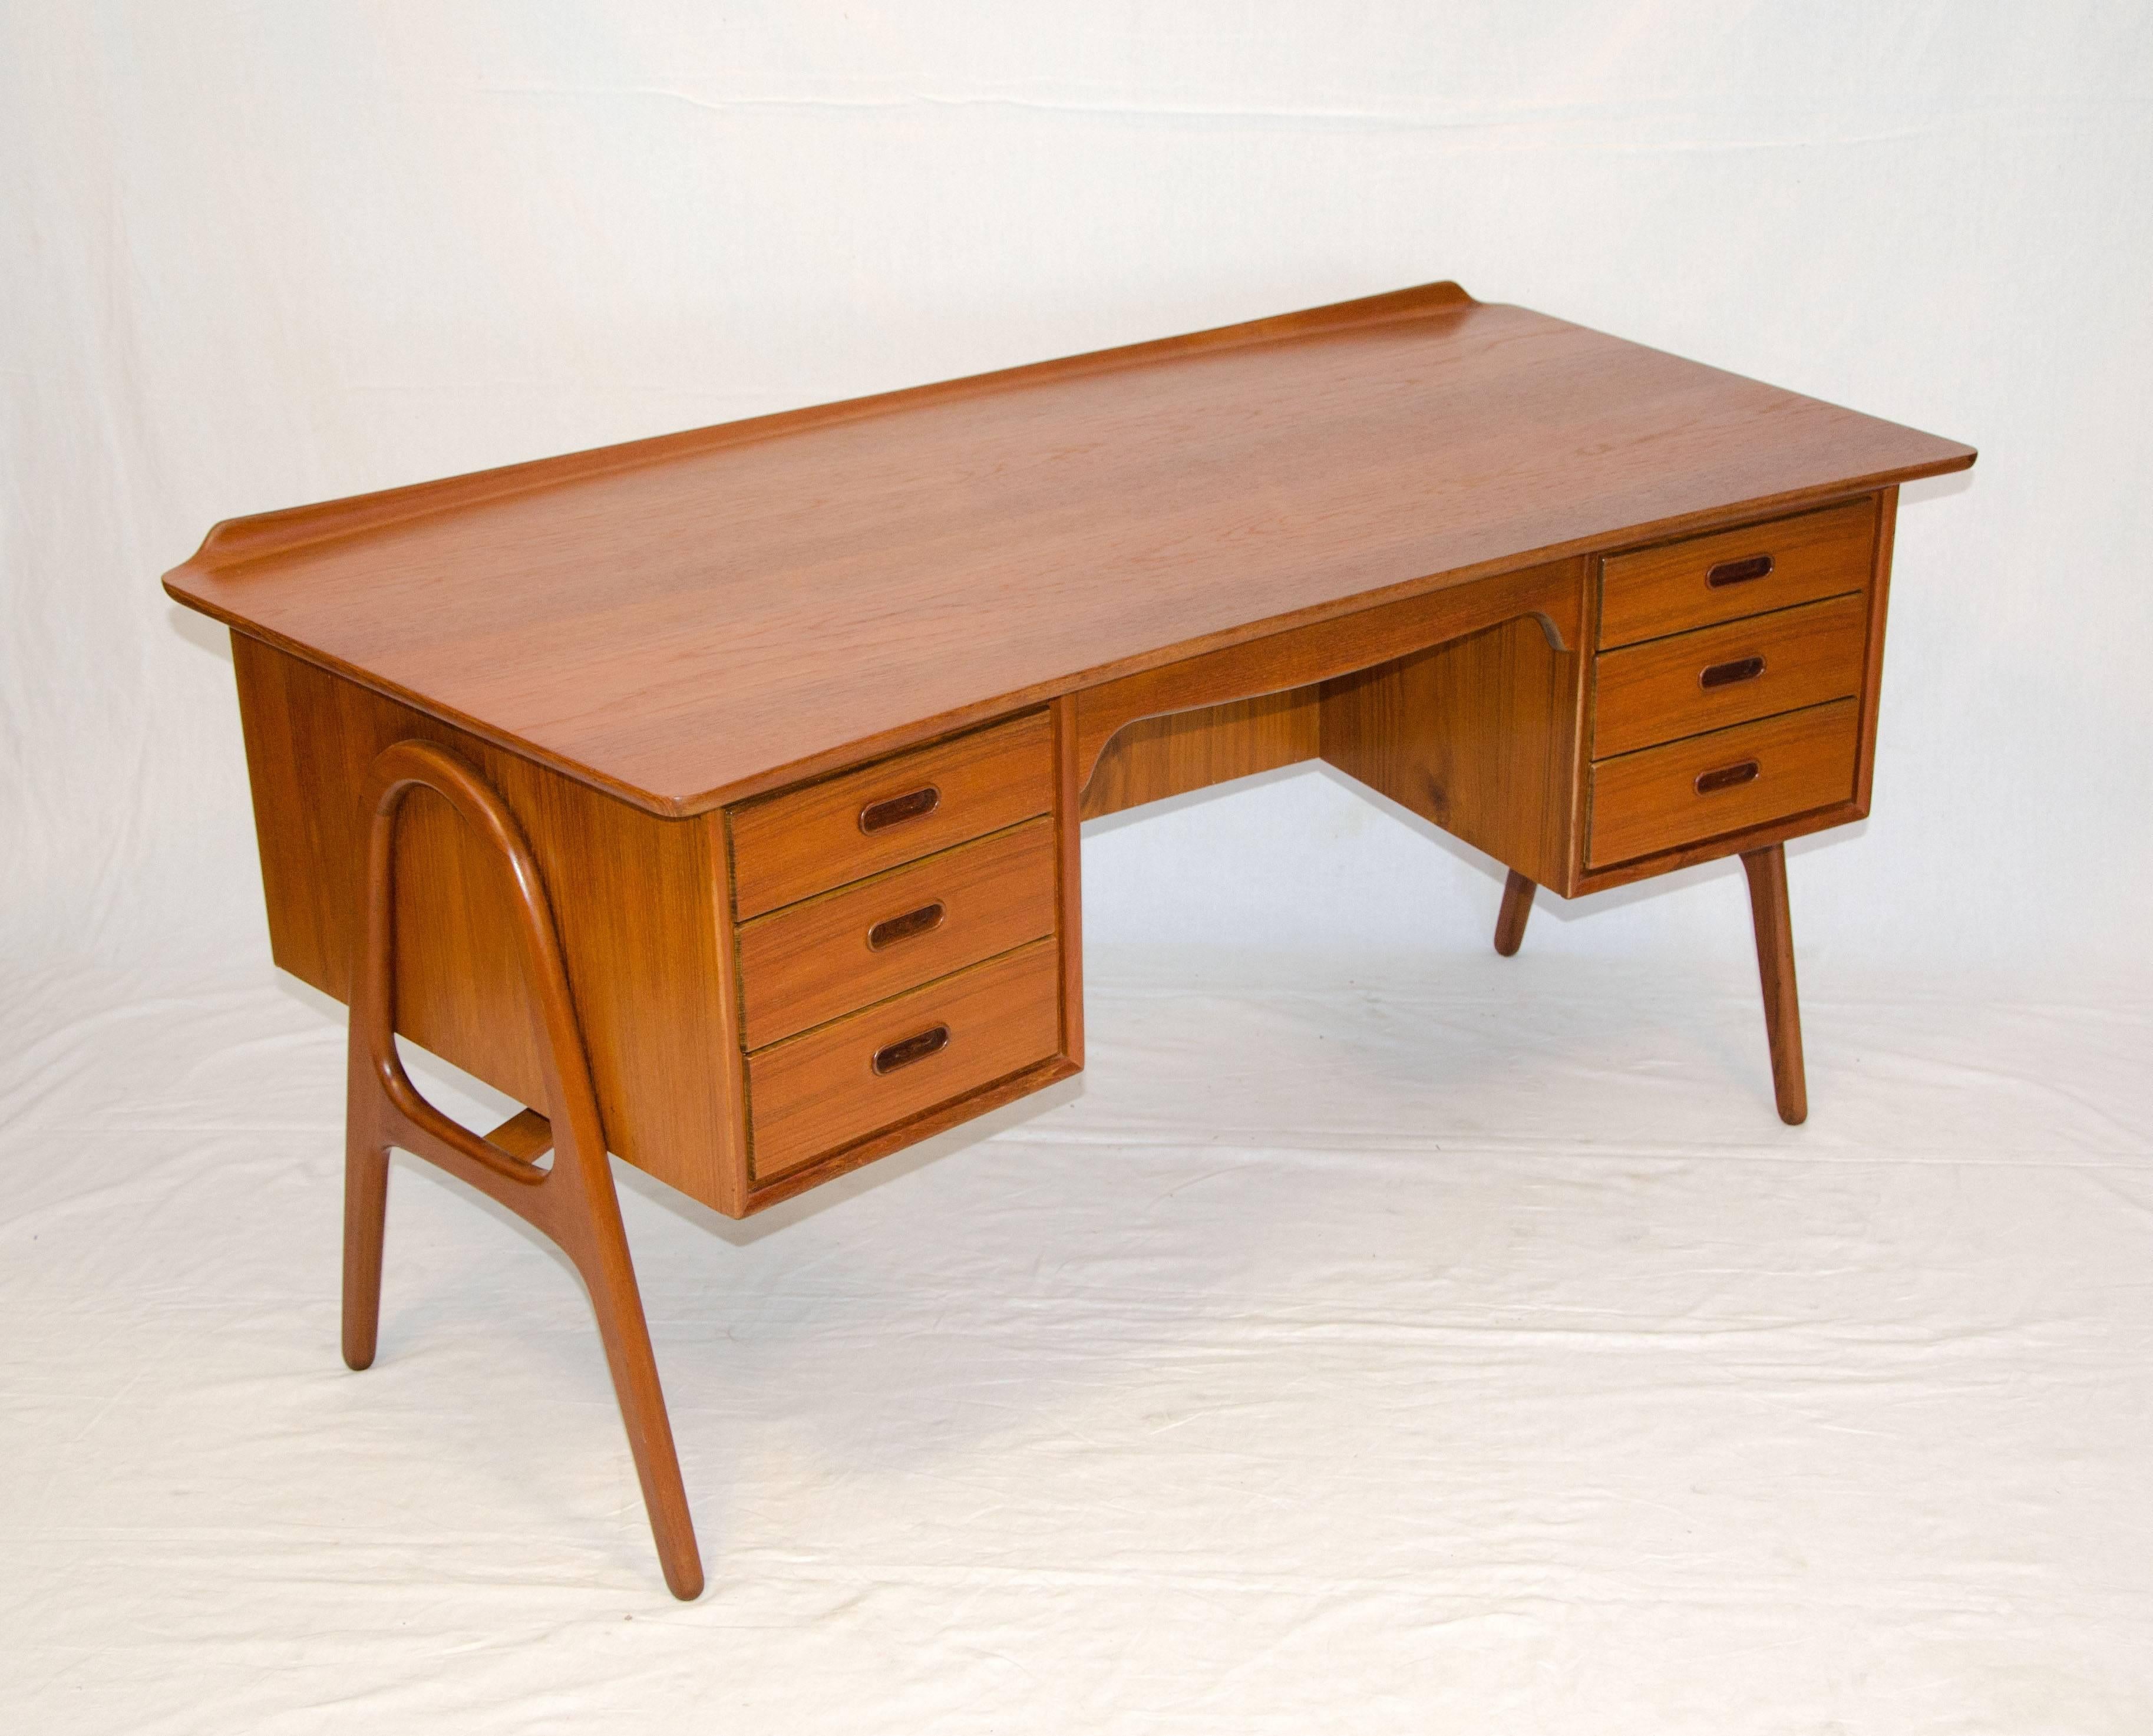 Very nice Danish modern desk marked "Designed by Architect Svend & Madsen" on drawer bottoms. Curved end of desk has a raised gallery to keep paperwork from falling off. Also has a bookcase on the backside. Desk is suspended on two